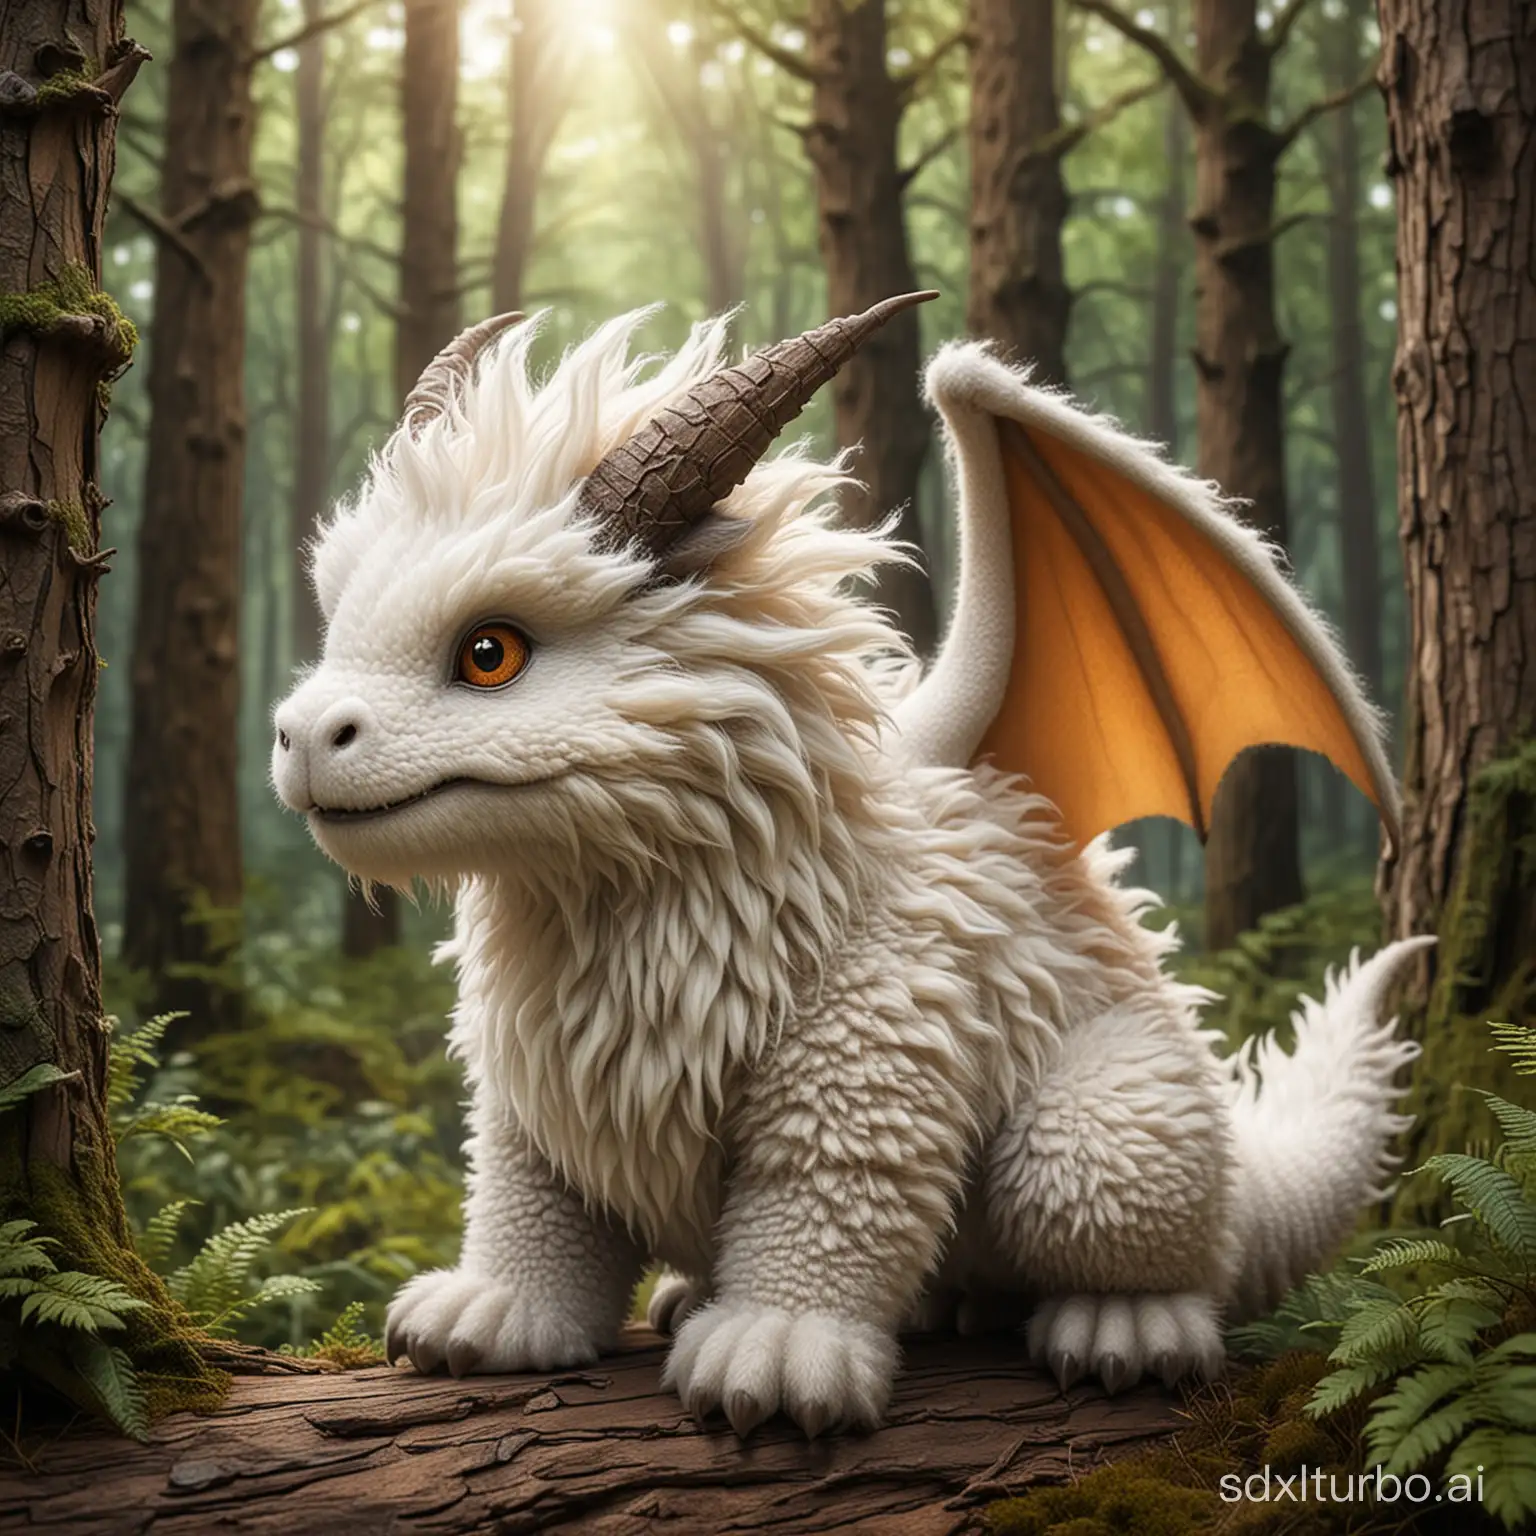 Cute fluffy, woolly dragon in the forest